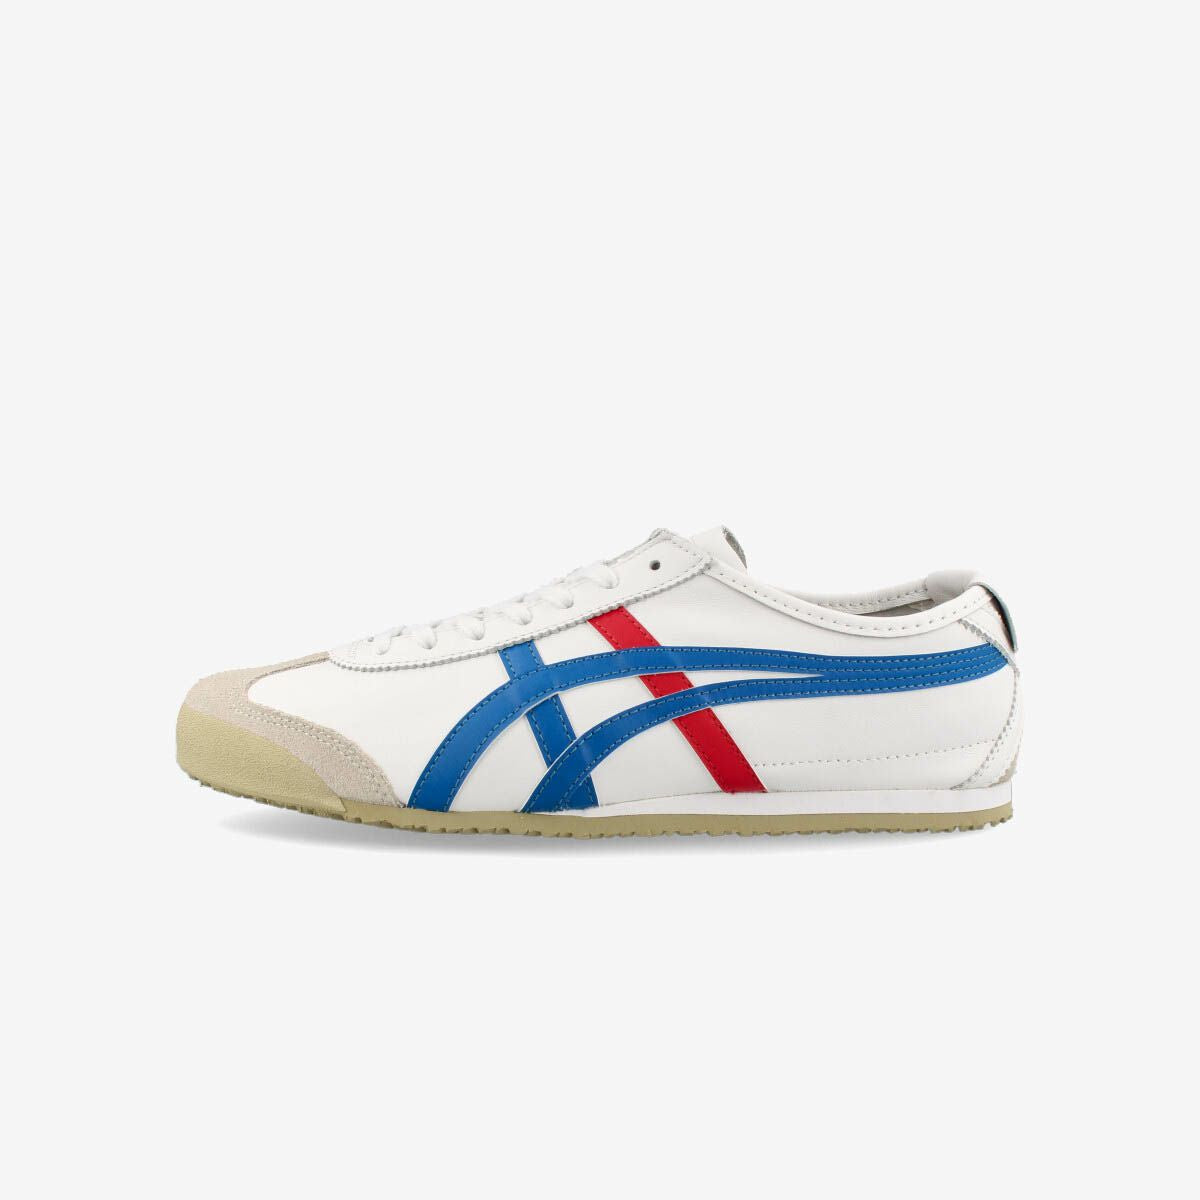 Onitsuka Tiger MEXICO 66 WHITE/BLUE/RED